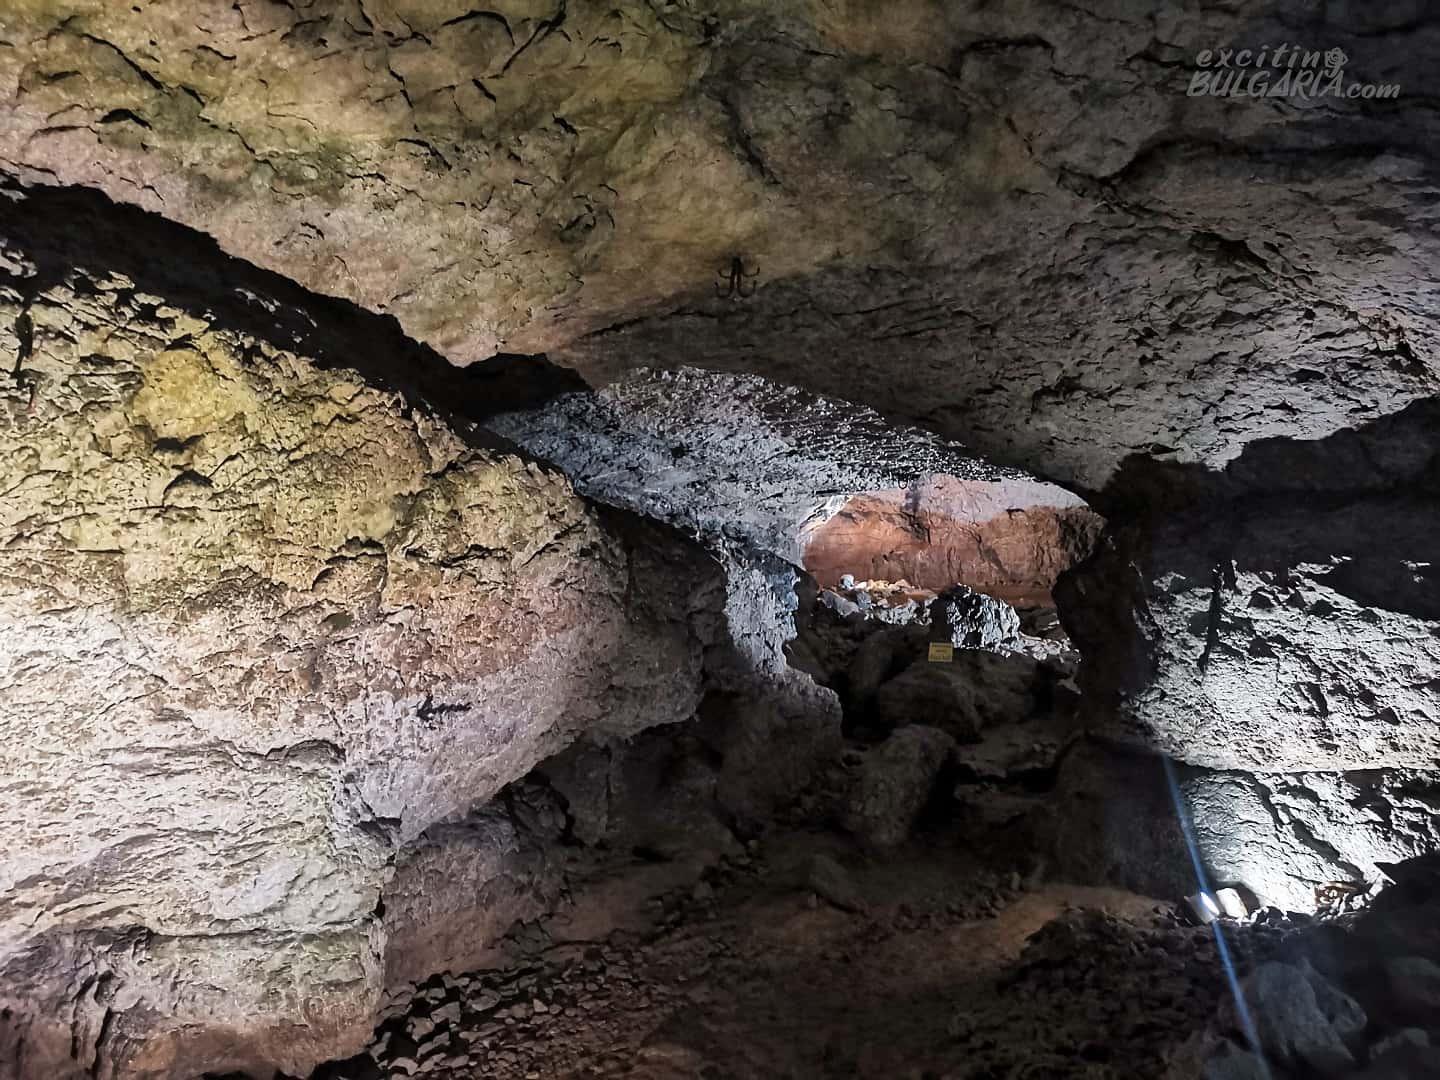 A passage in the Bacho Kiro cave